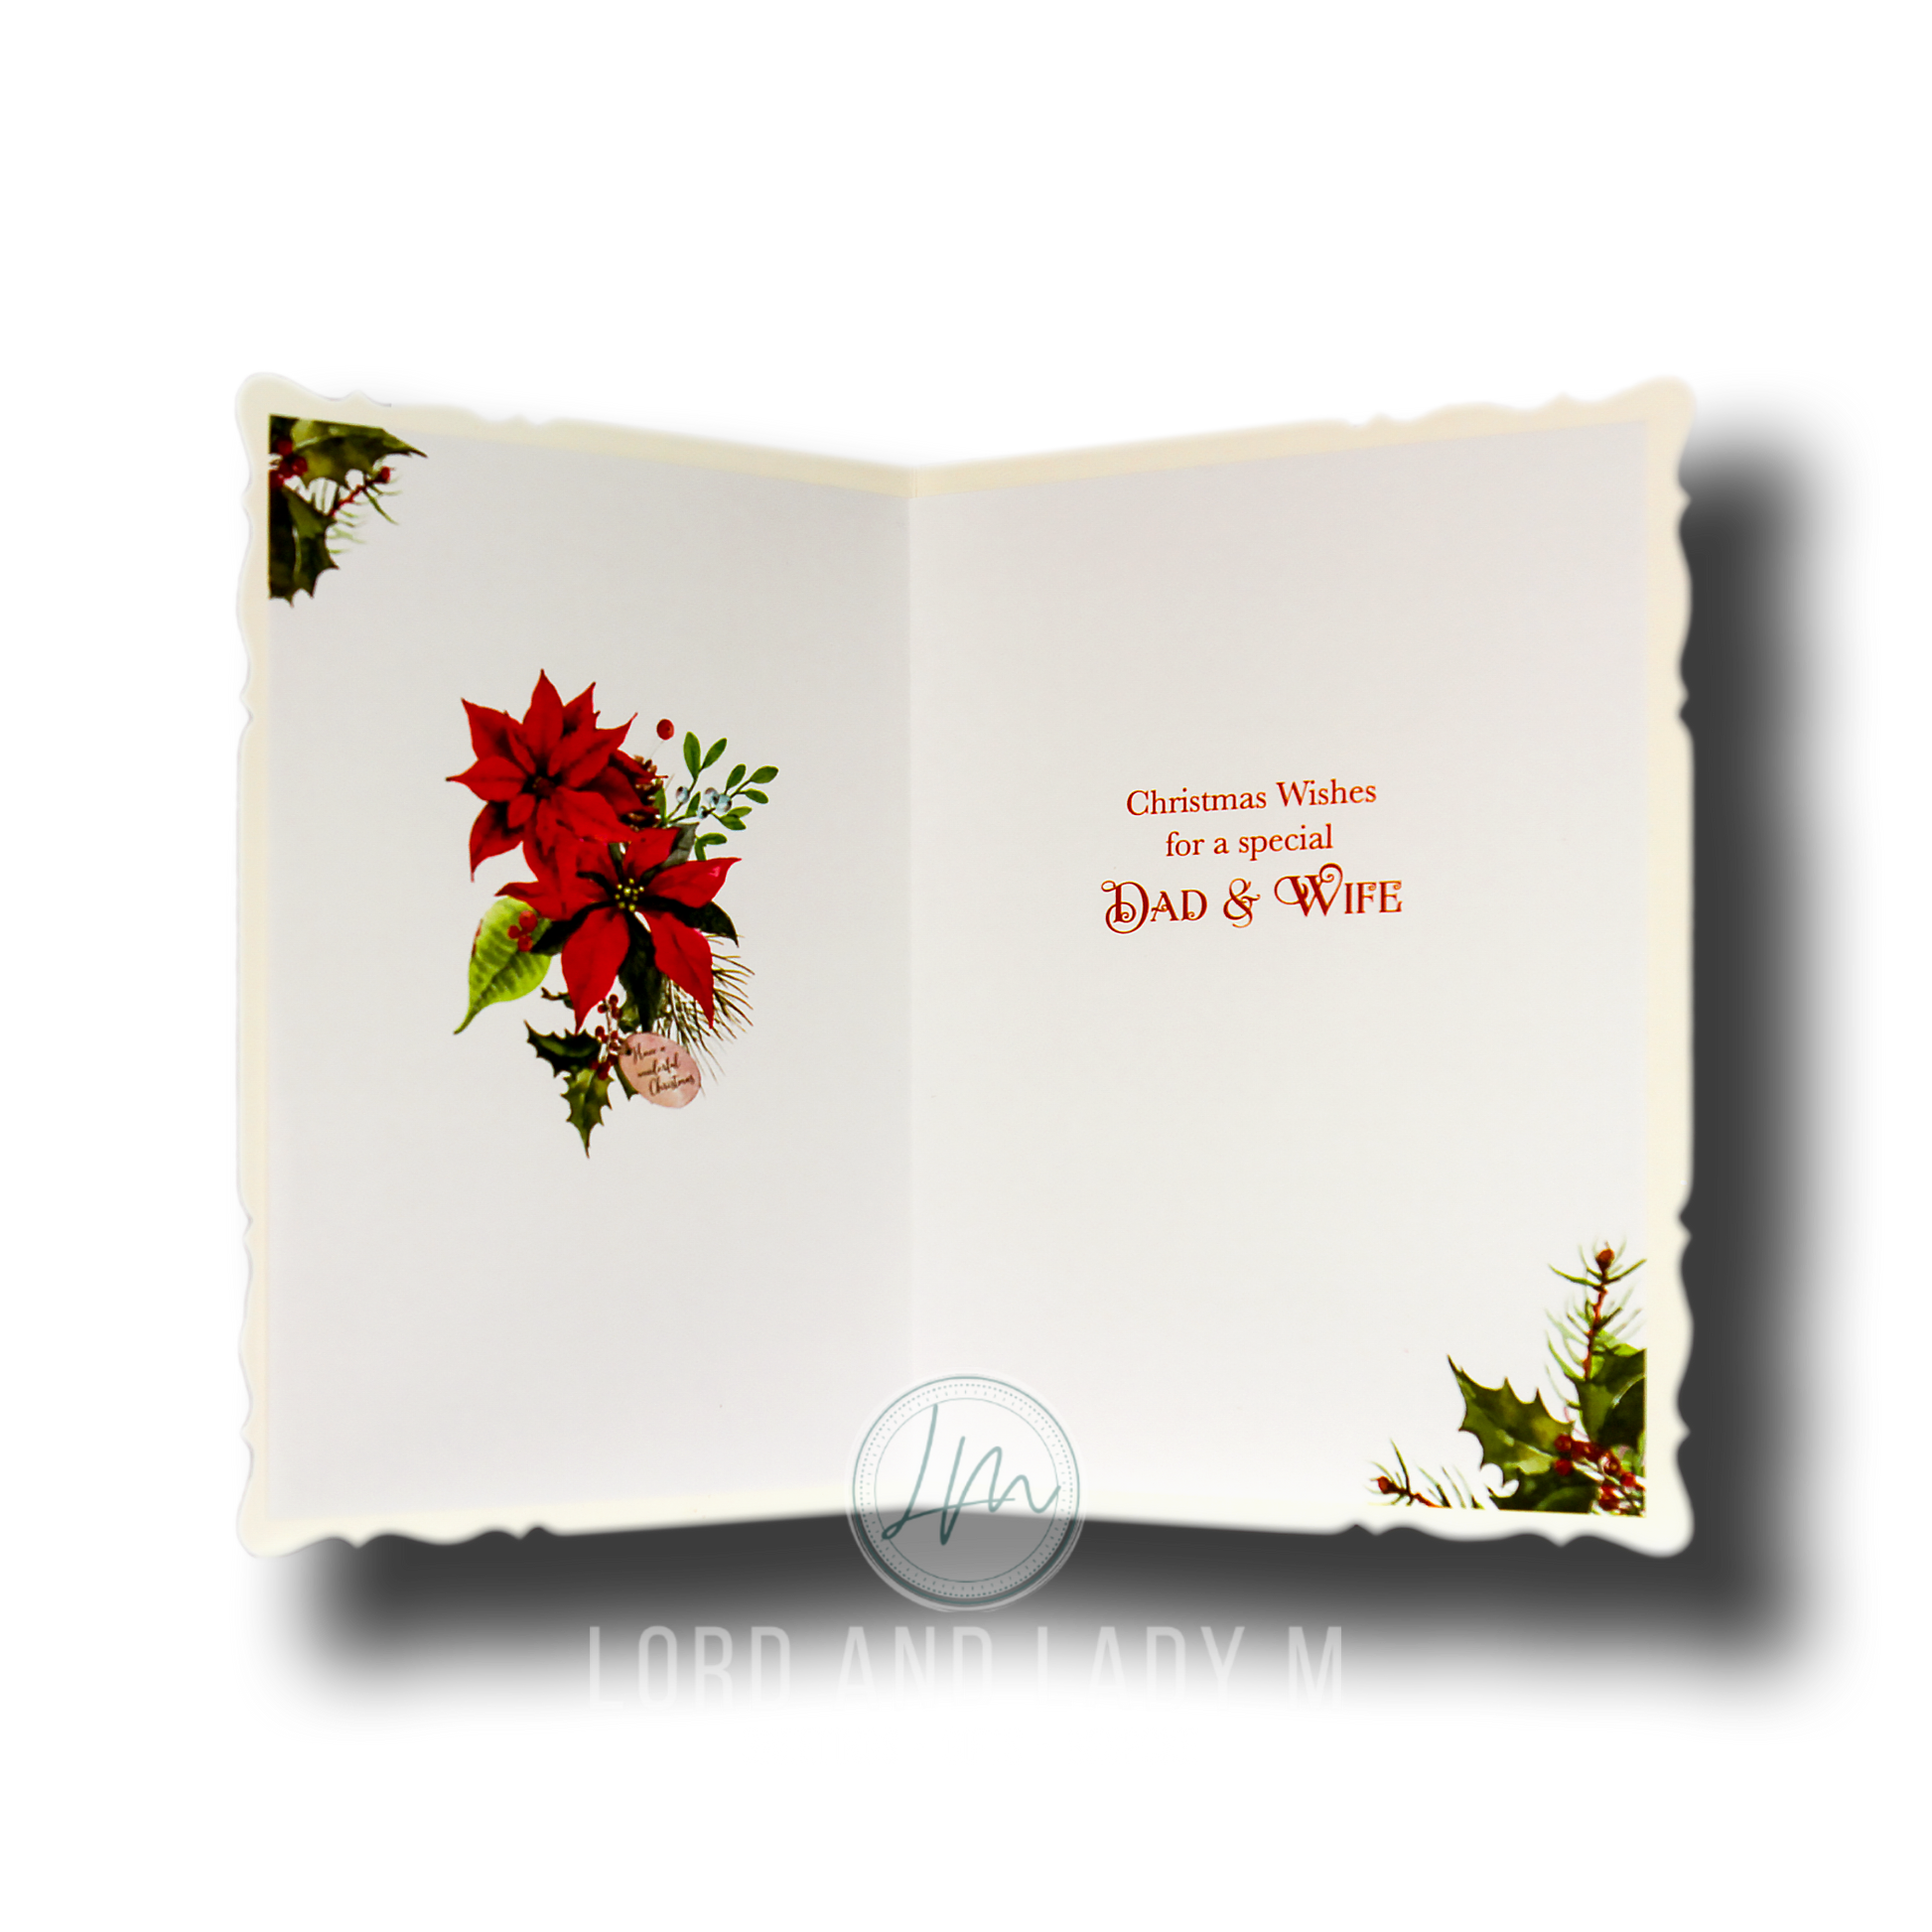 19cm - Merry Christmas Dad & Wife Wishing You - GH